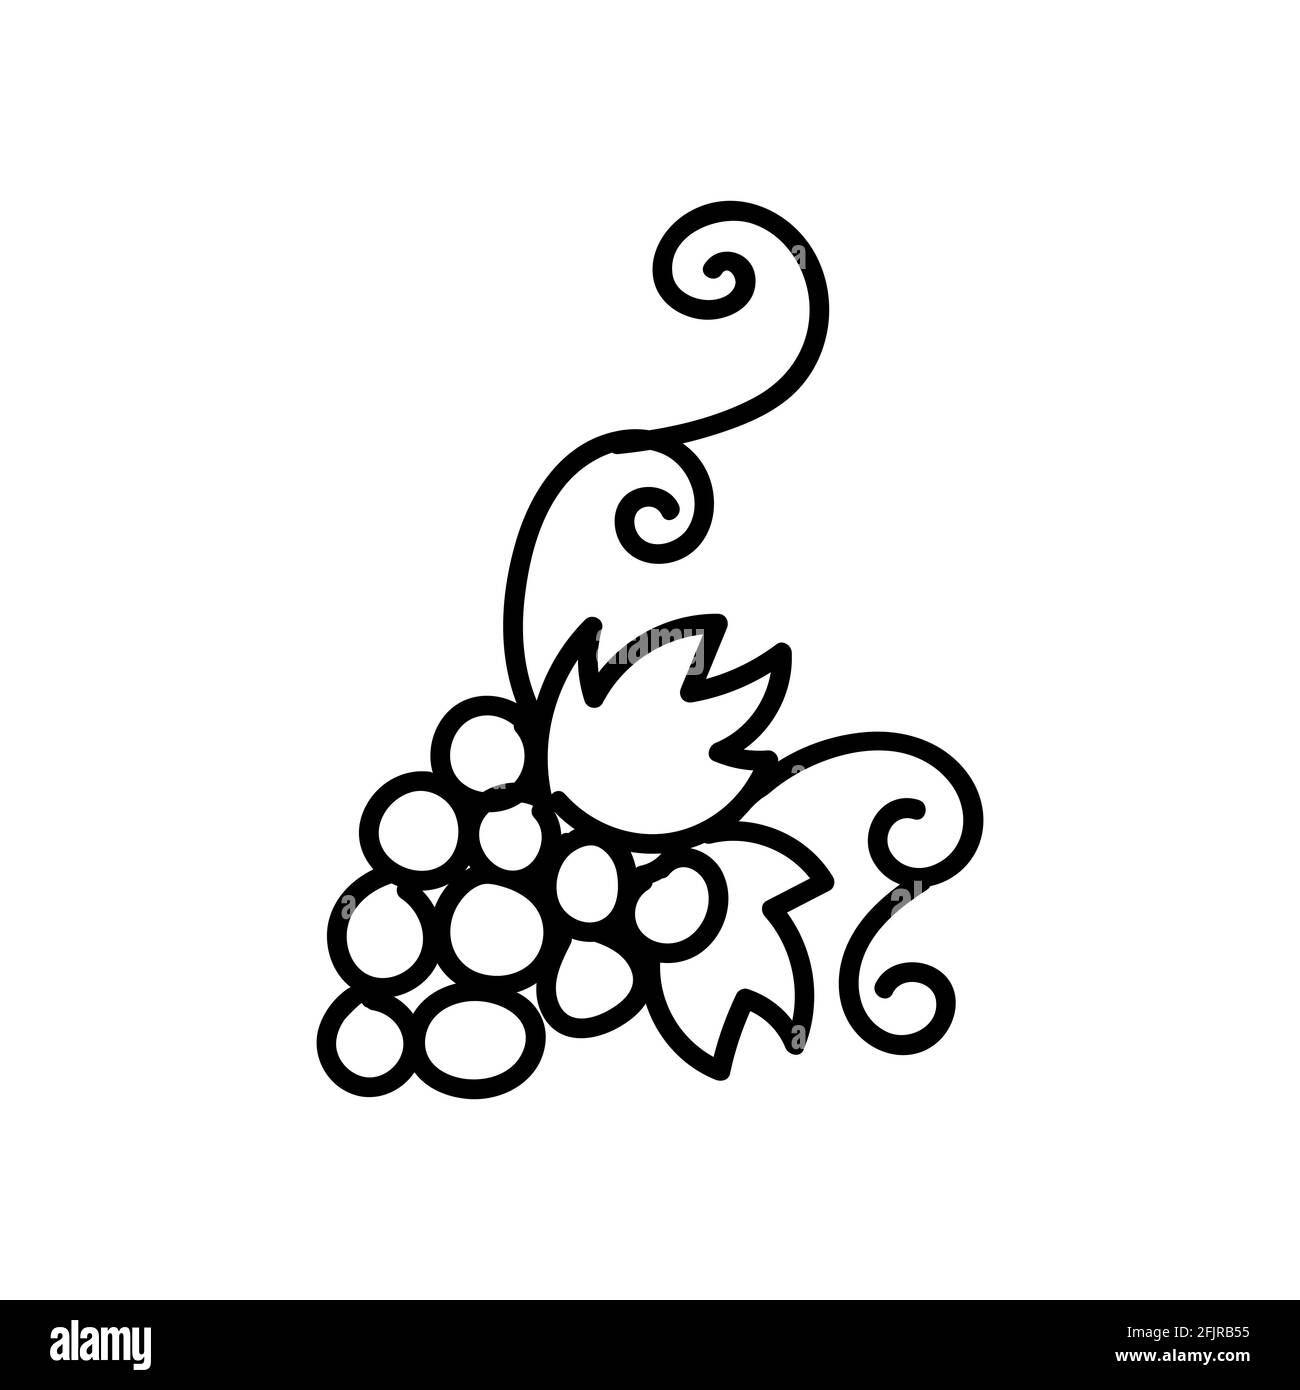 grapevine. Hand drawn doodle vector illustration isolated on whithe background. Simple drawings with black color. Stock Vector